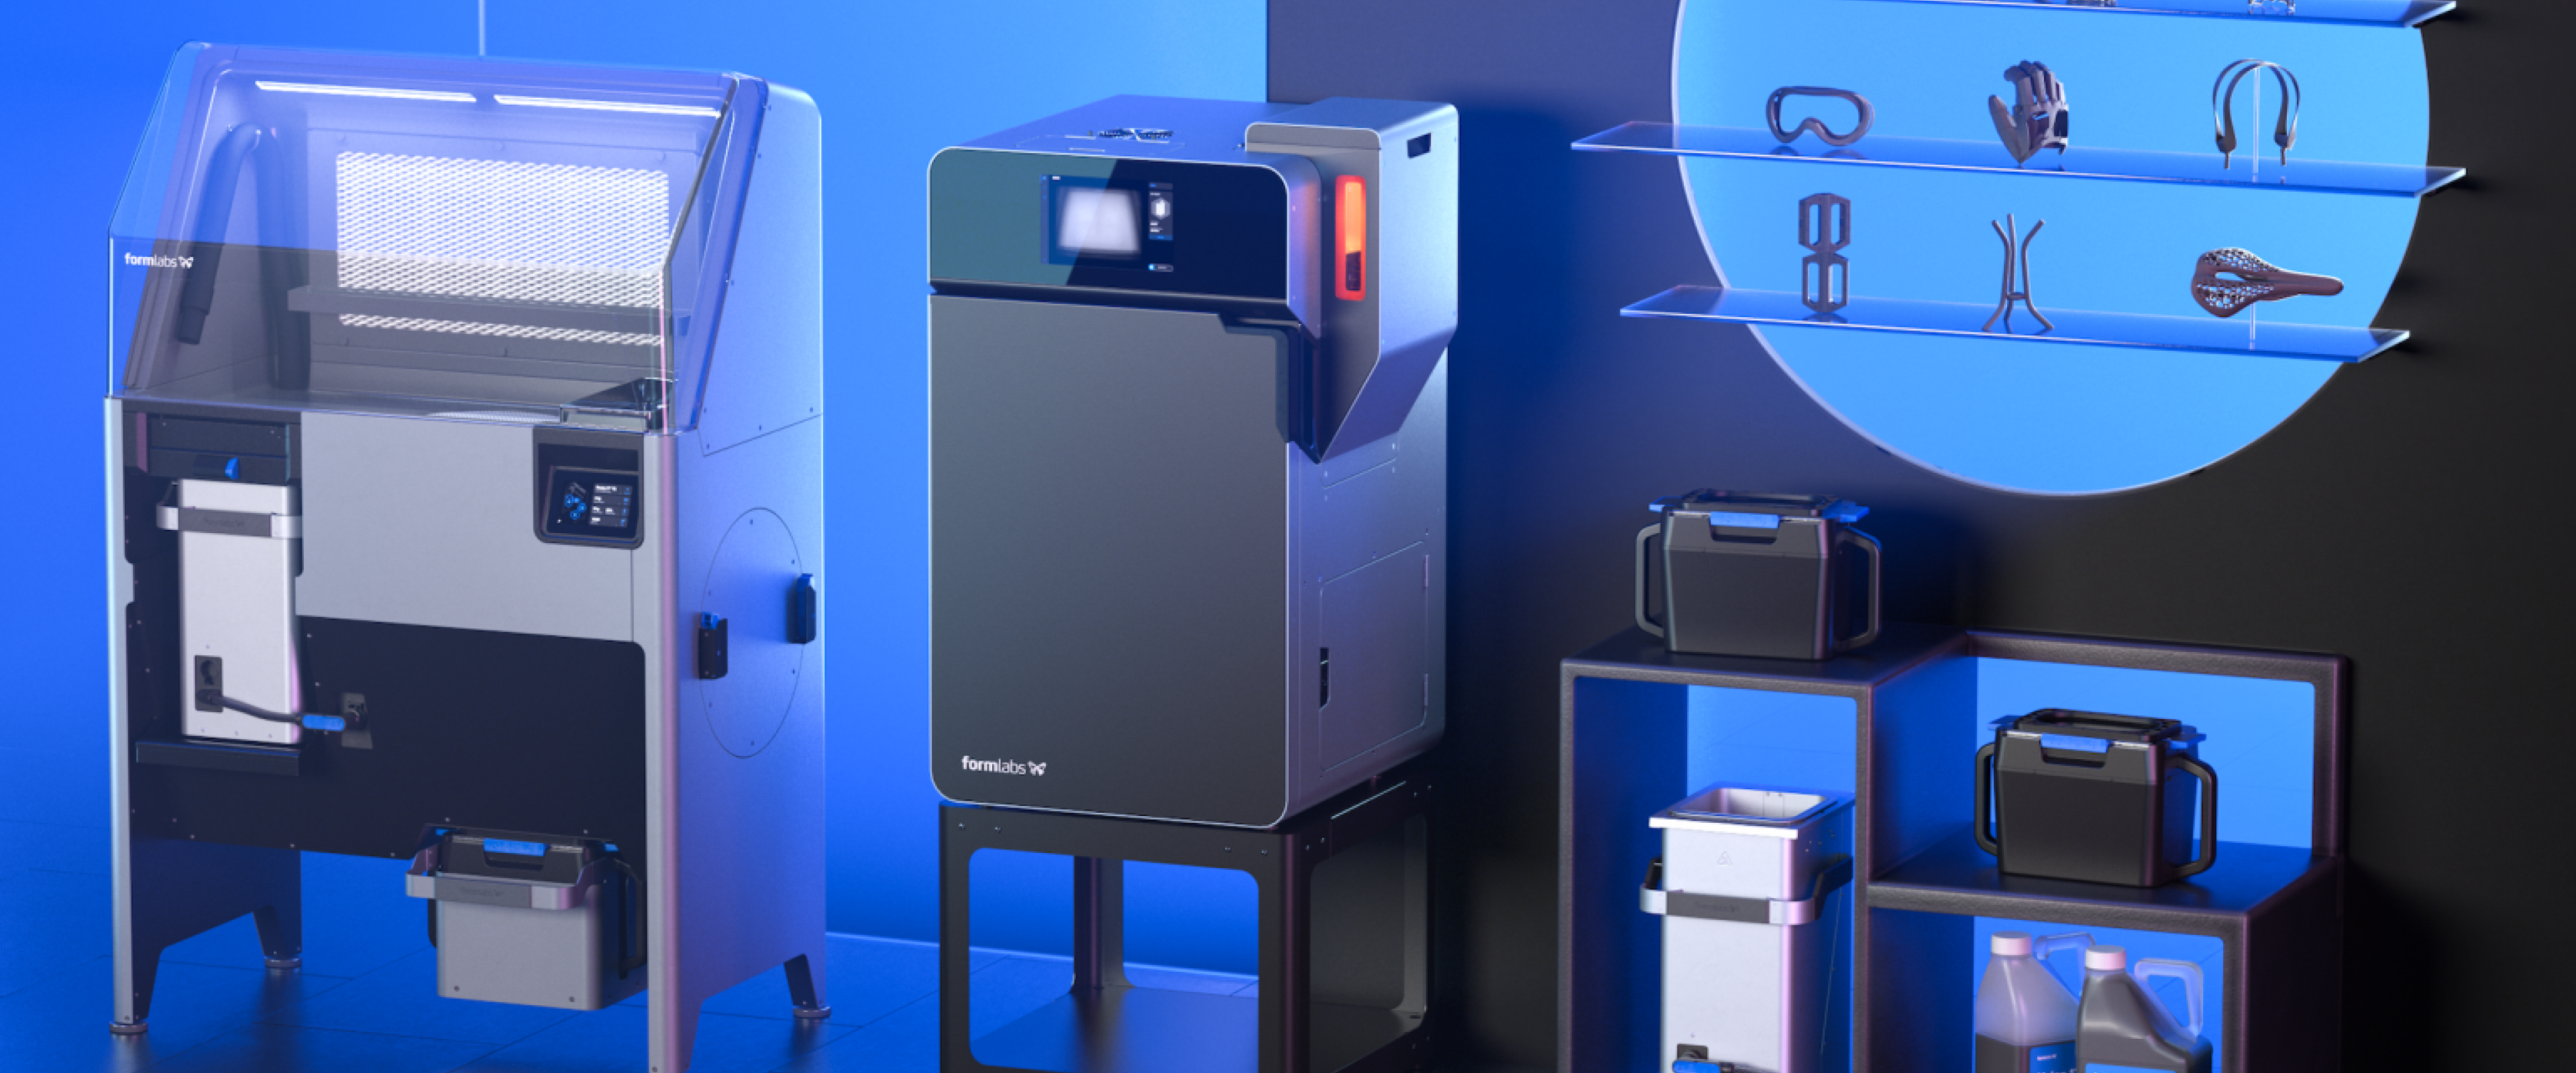 Launching and Marketing the Formlabs Fuse 1 3D Printing Ecosystem